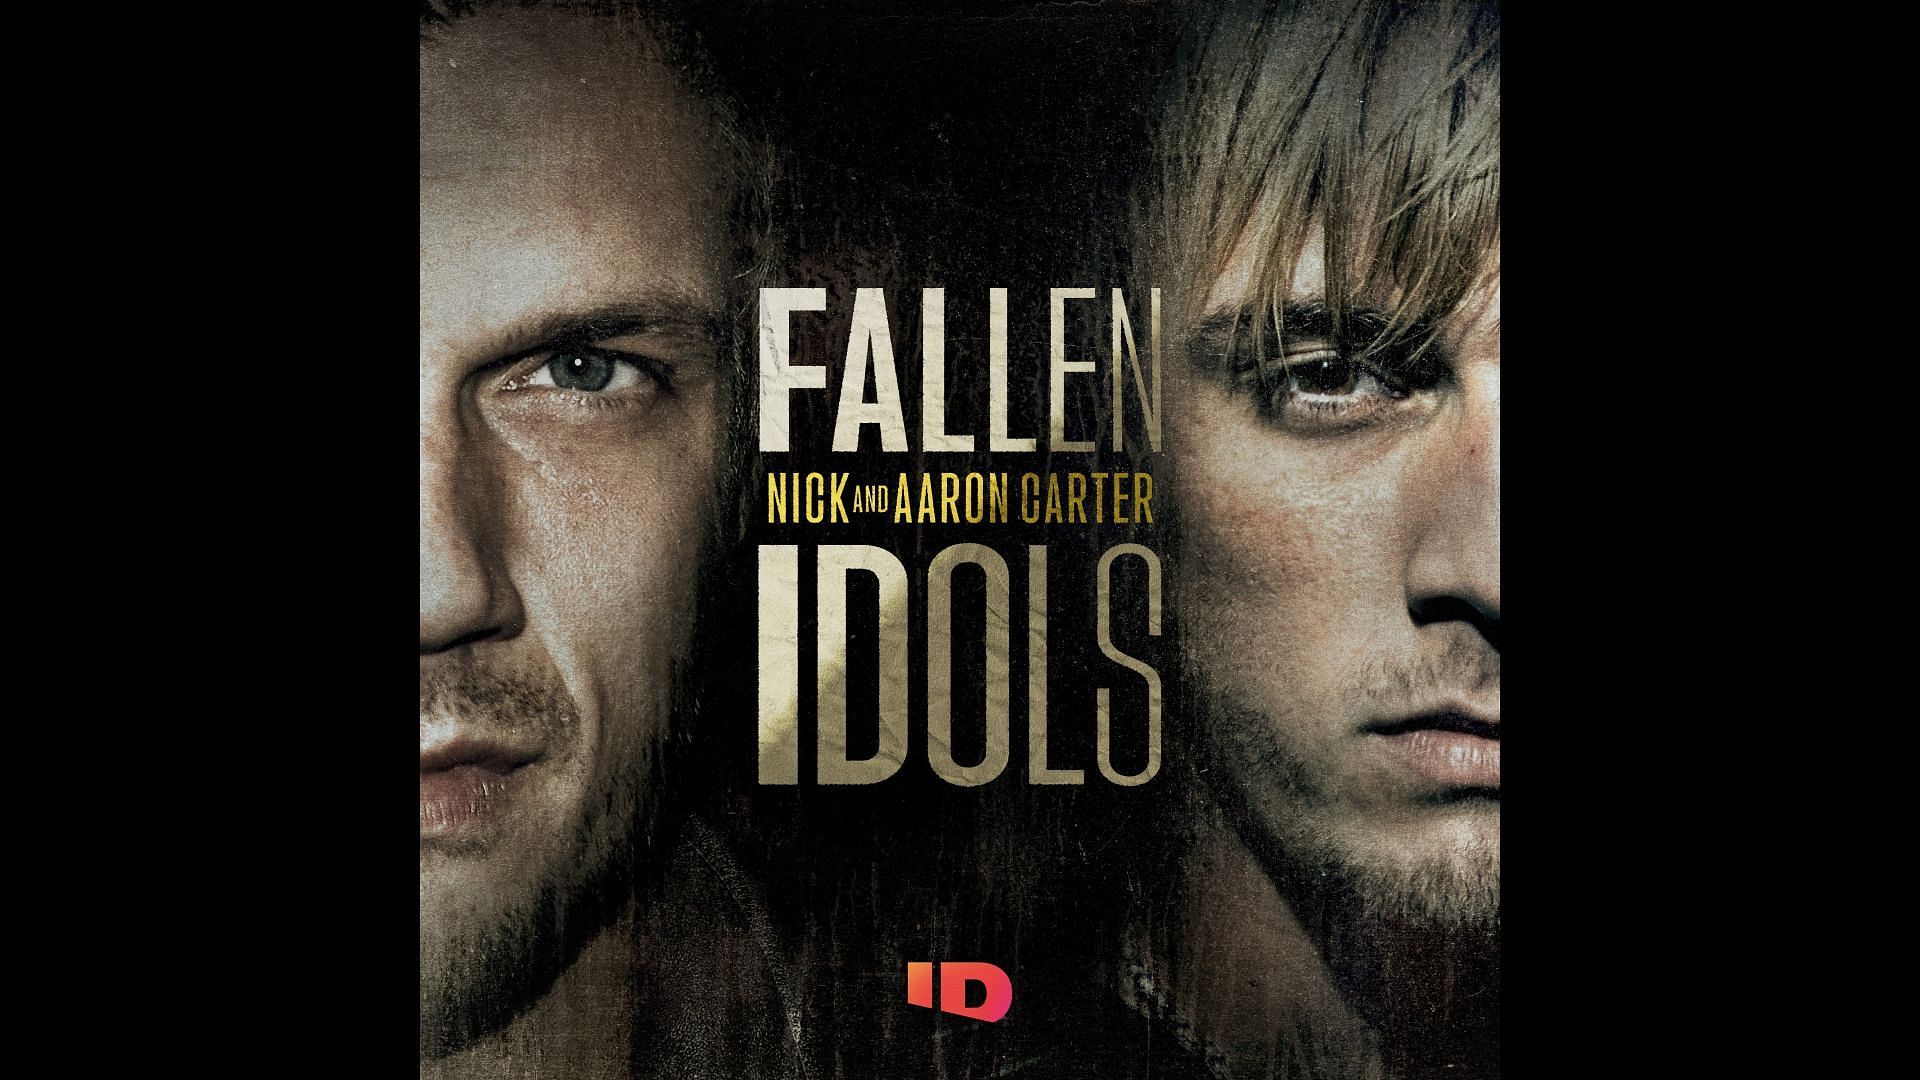  Fallen Idols: Nick and Aaron Carter chronicles the sexual abuse allegations against Nick Carter and the relationship between the Carter brothers (Image via IMDb)